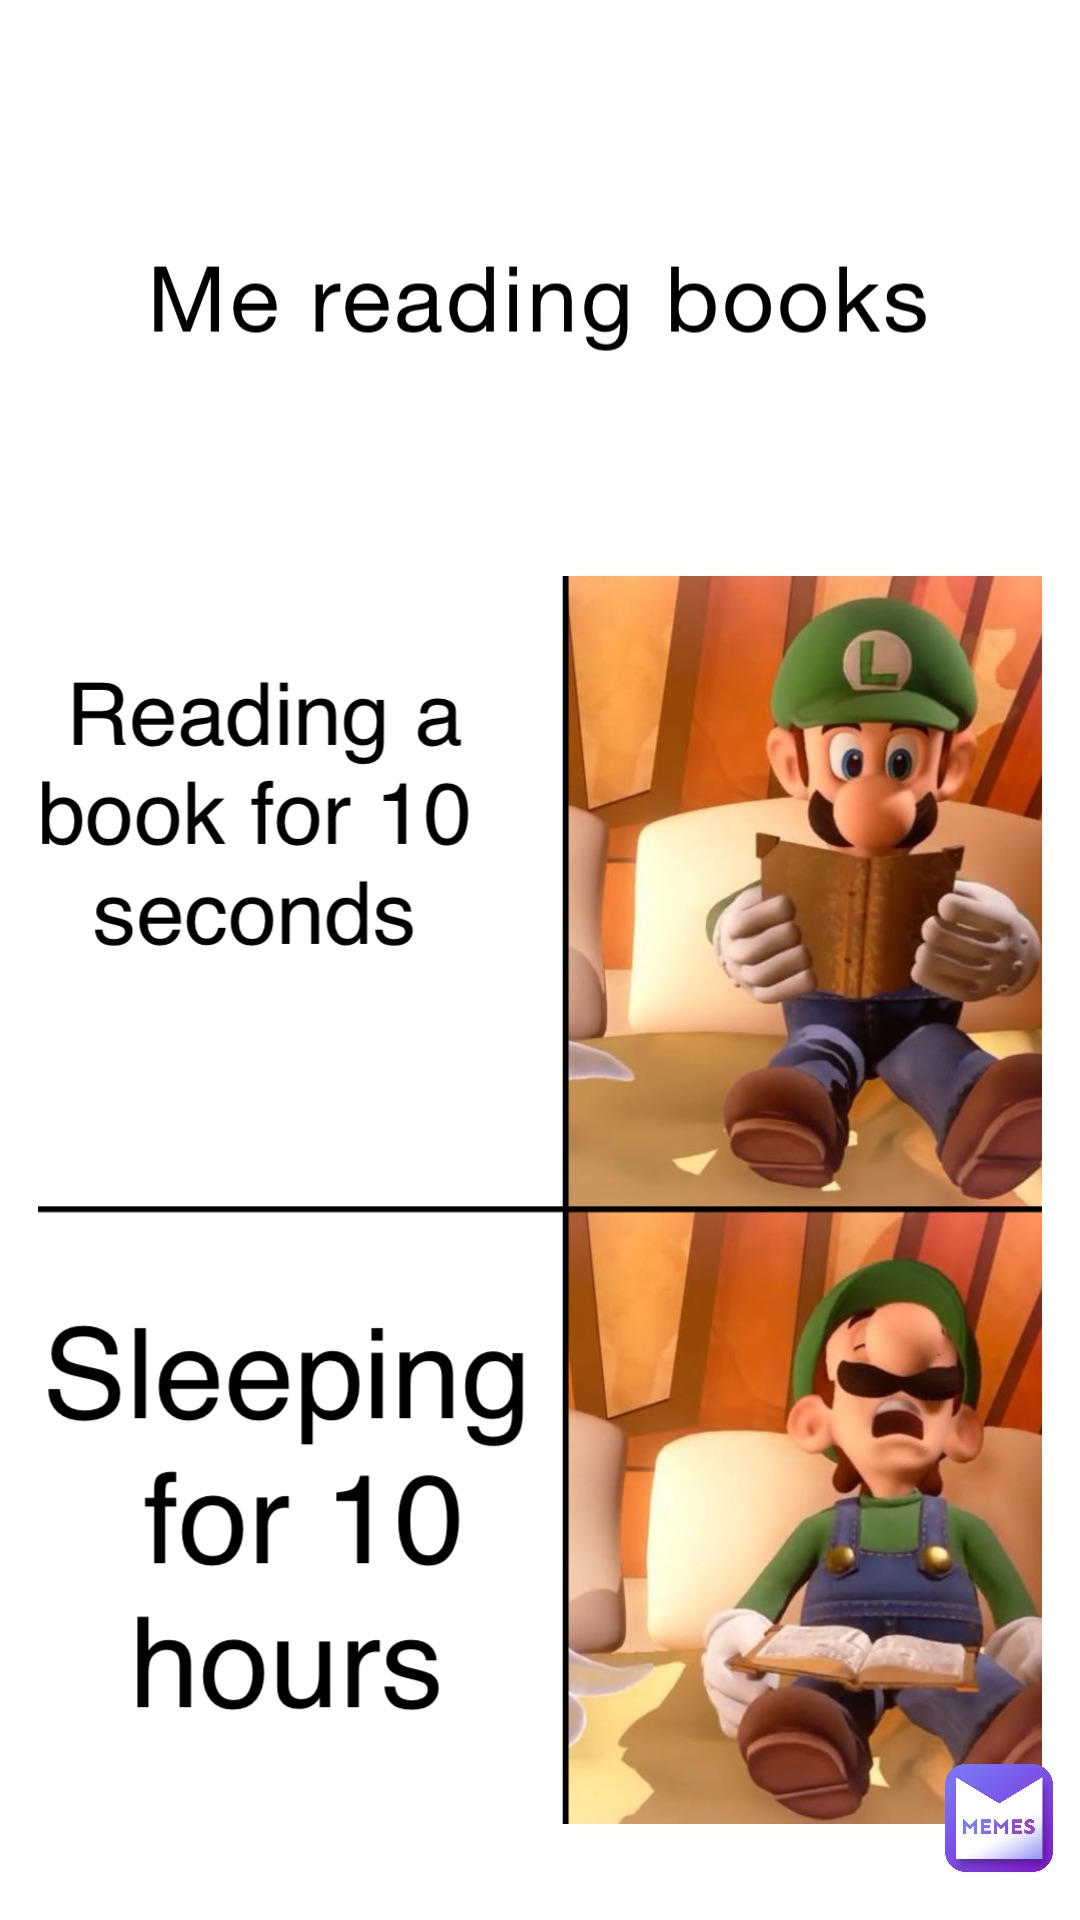 Me reading books Reading a book for 10 seconds sleeping for 10 hours